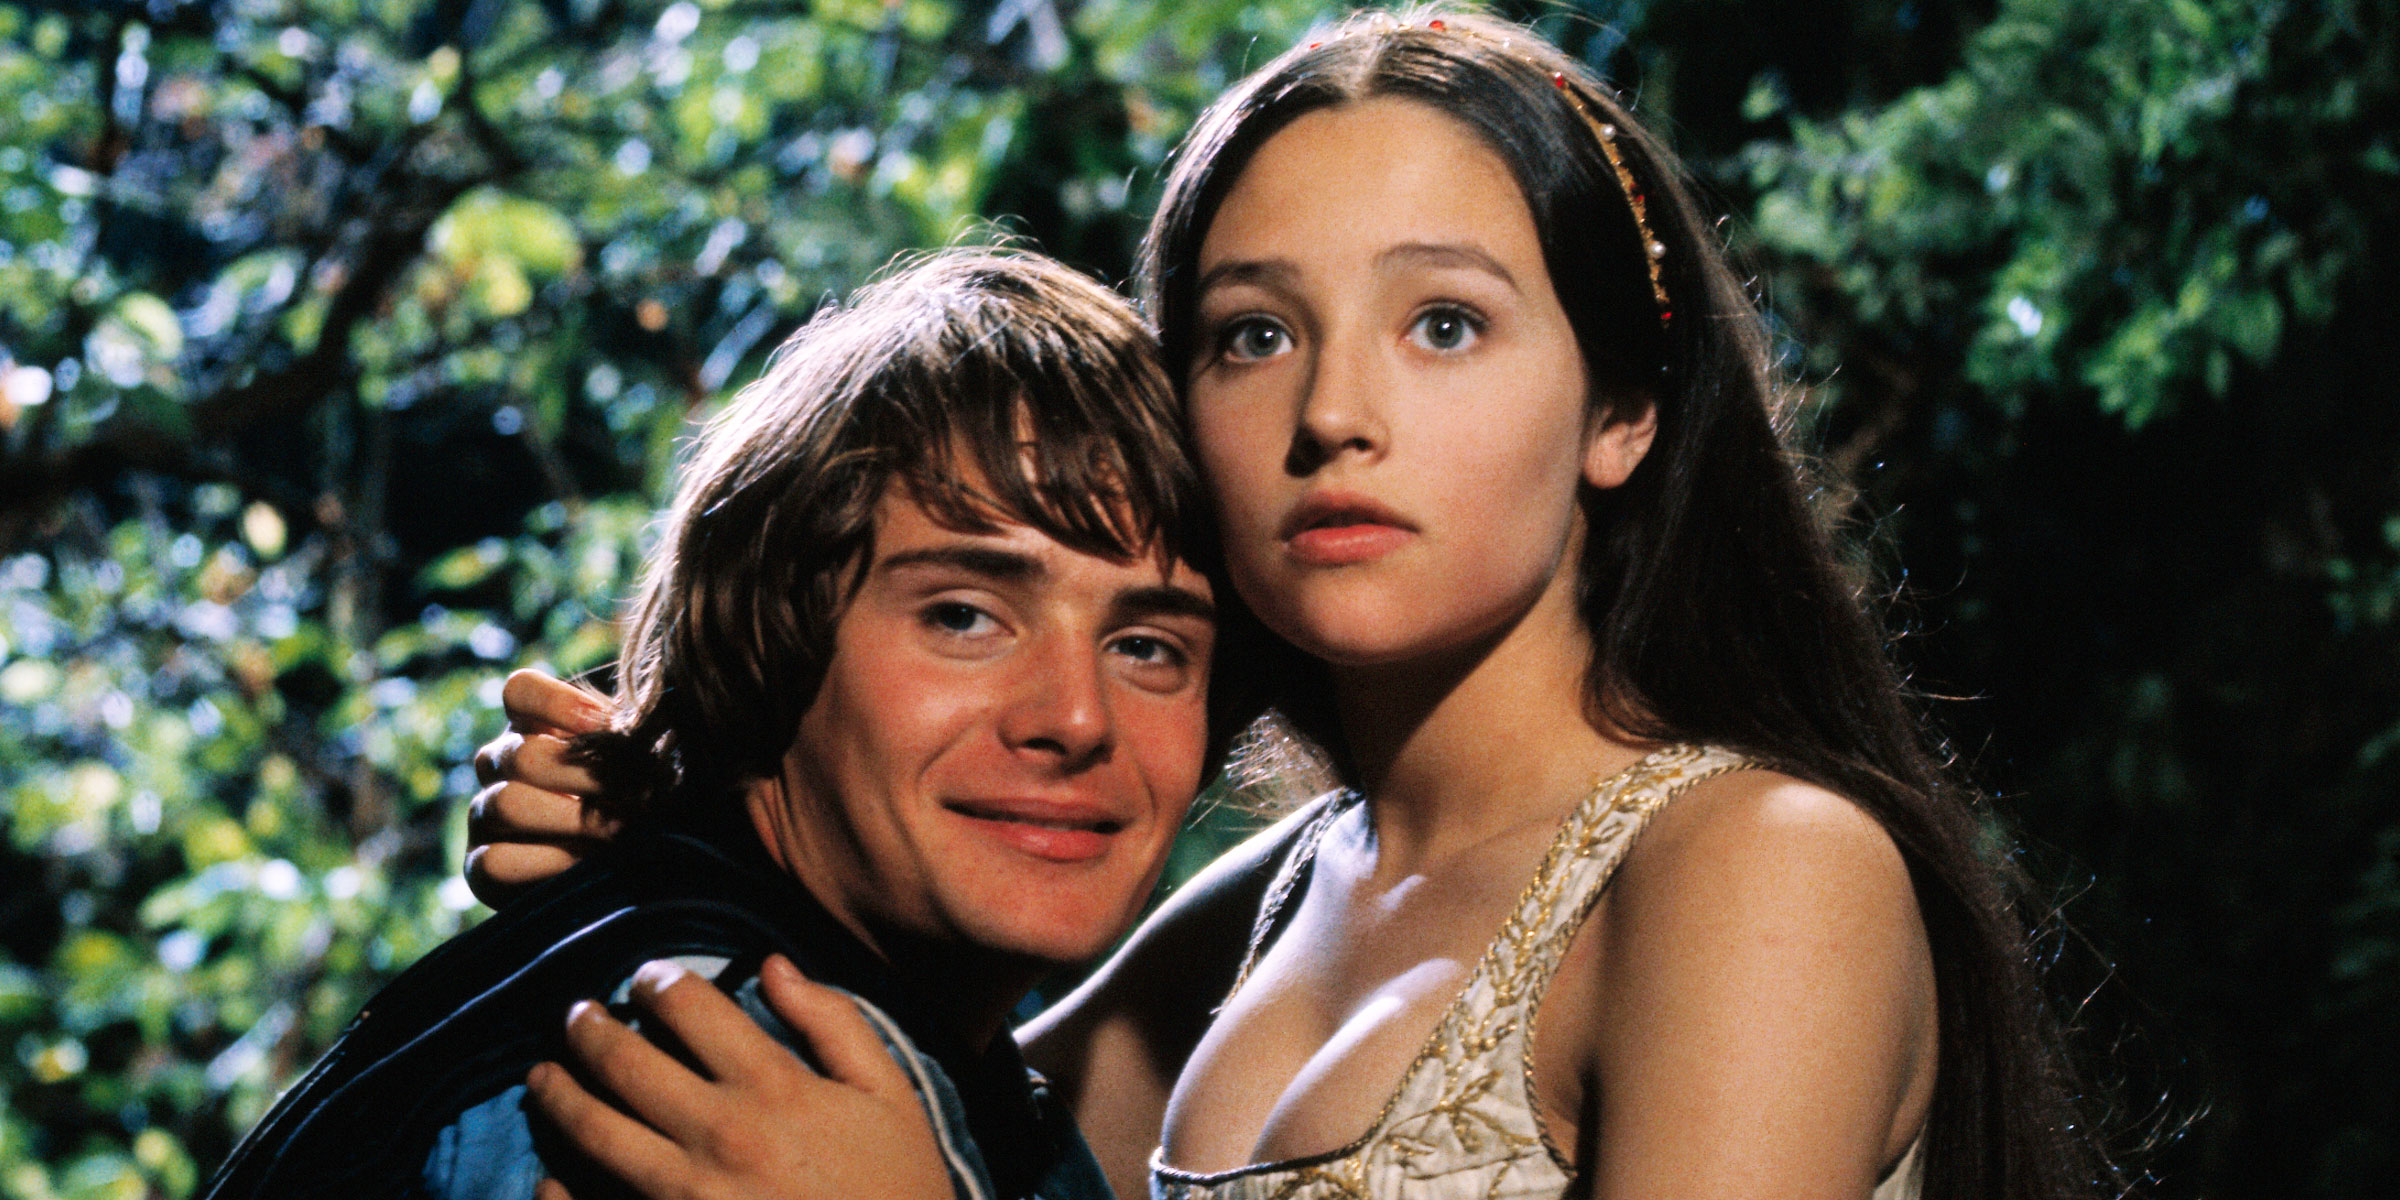 Romeo and Juliet Stars Sue Paramount for Being Coerced Into Underage, Nude Sex Scene The Mary image